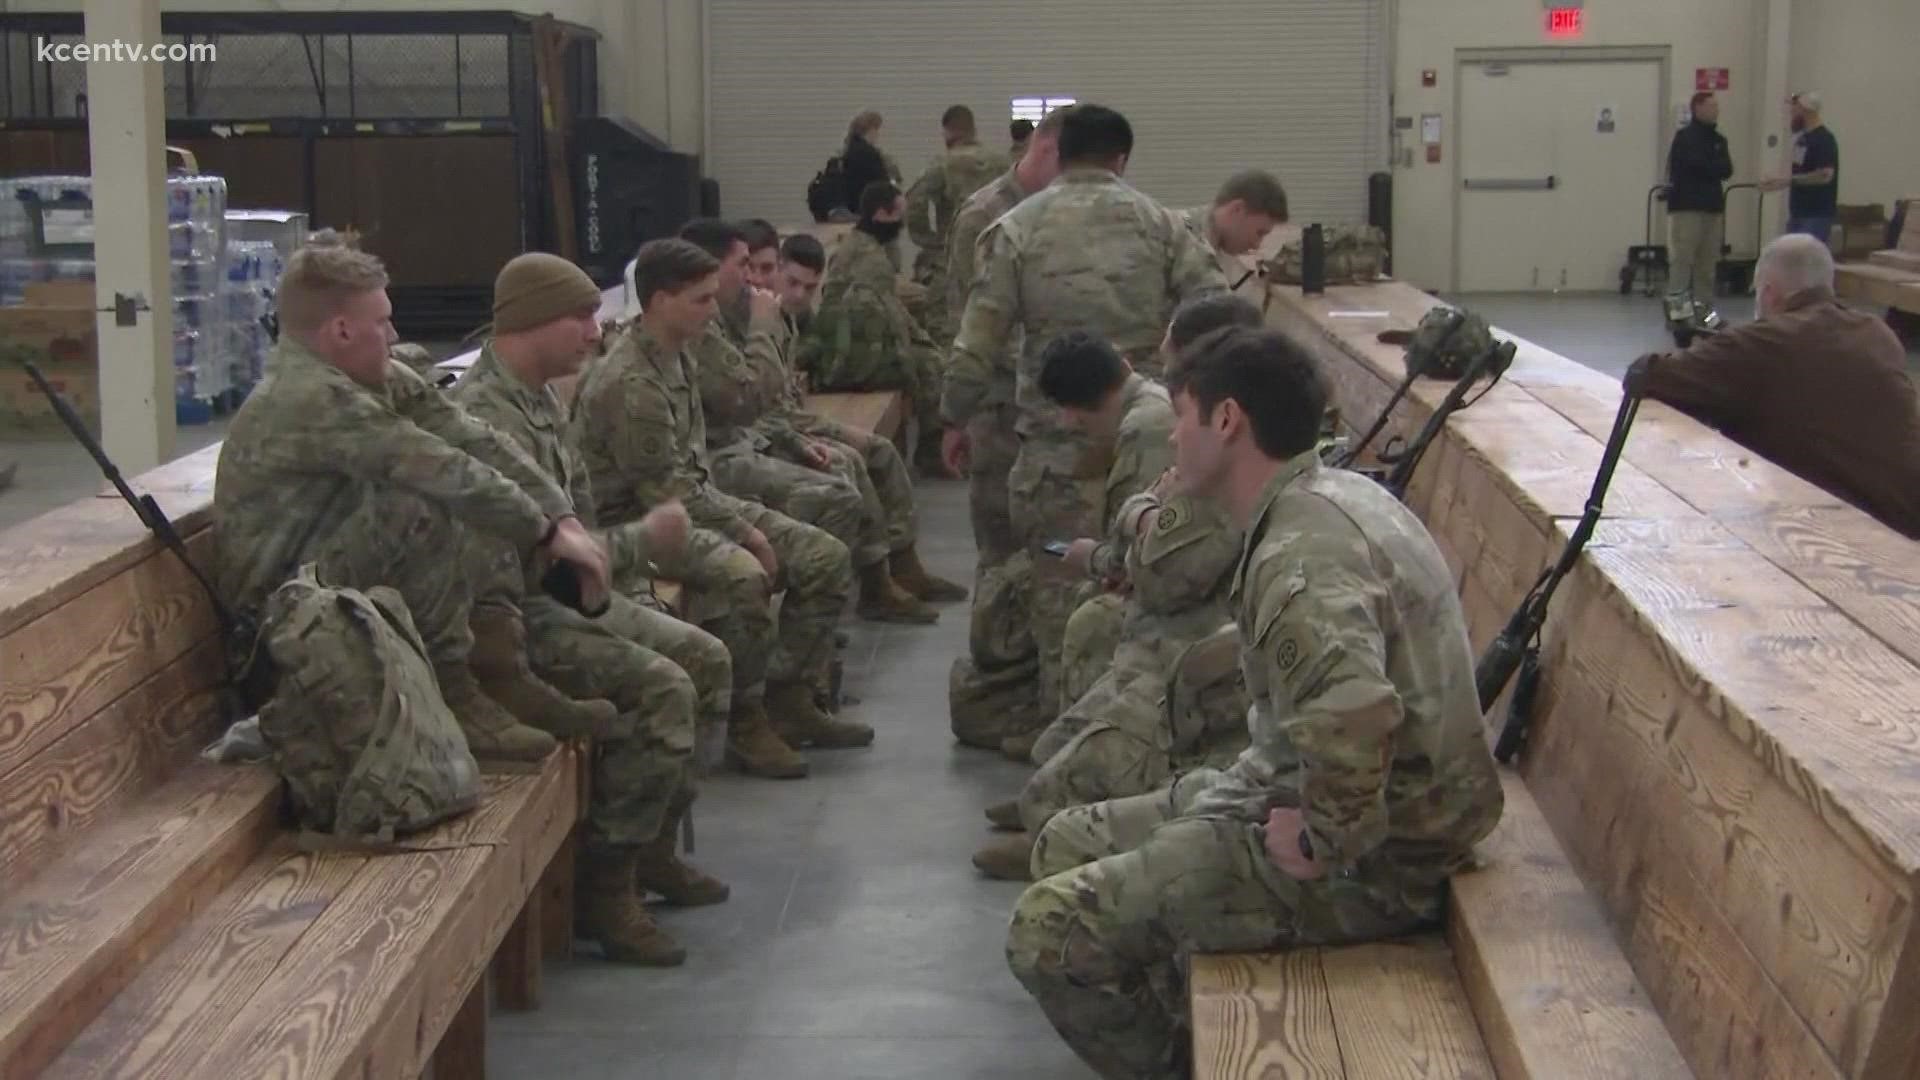 2,000 troops from Fort Bragg in North Carolina are being deployed to Eastern Europe.